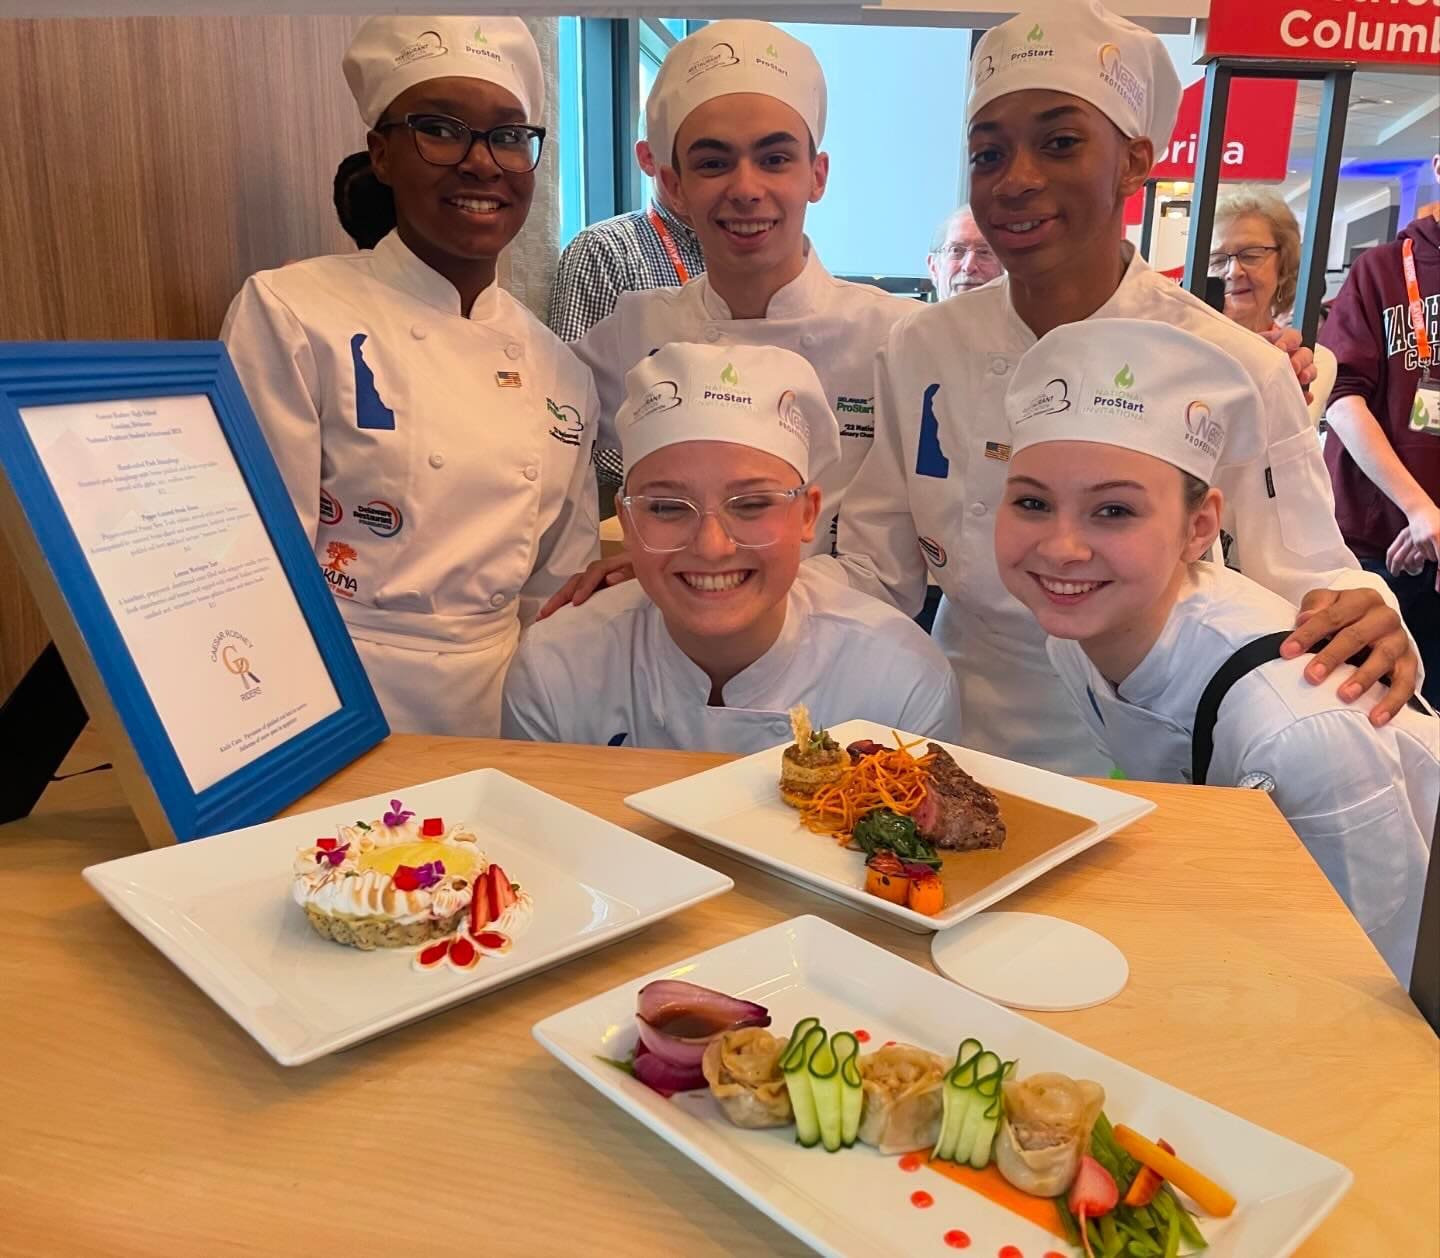 Featured image for “Caesar Rodney’s 5x state culinary winners win national title”